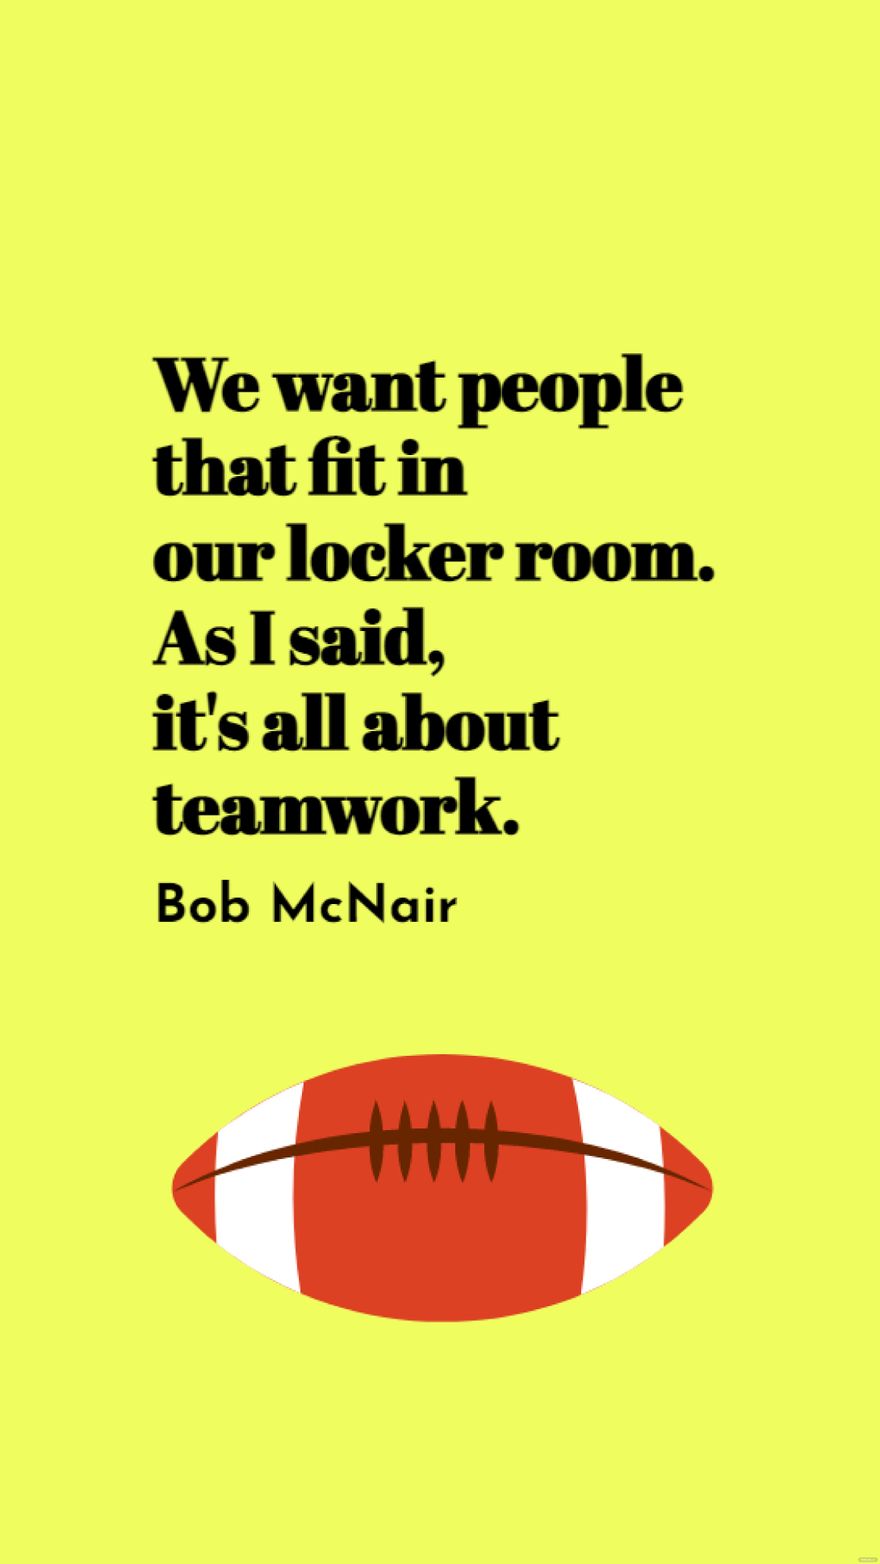 Free Bob McNair - We want people that fit in our locker room. As I said, it's all about teamwork.